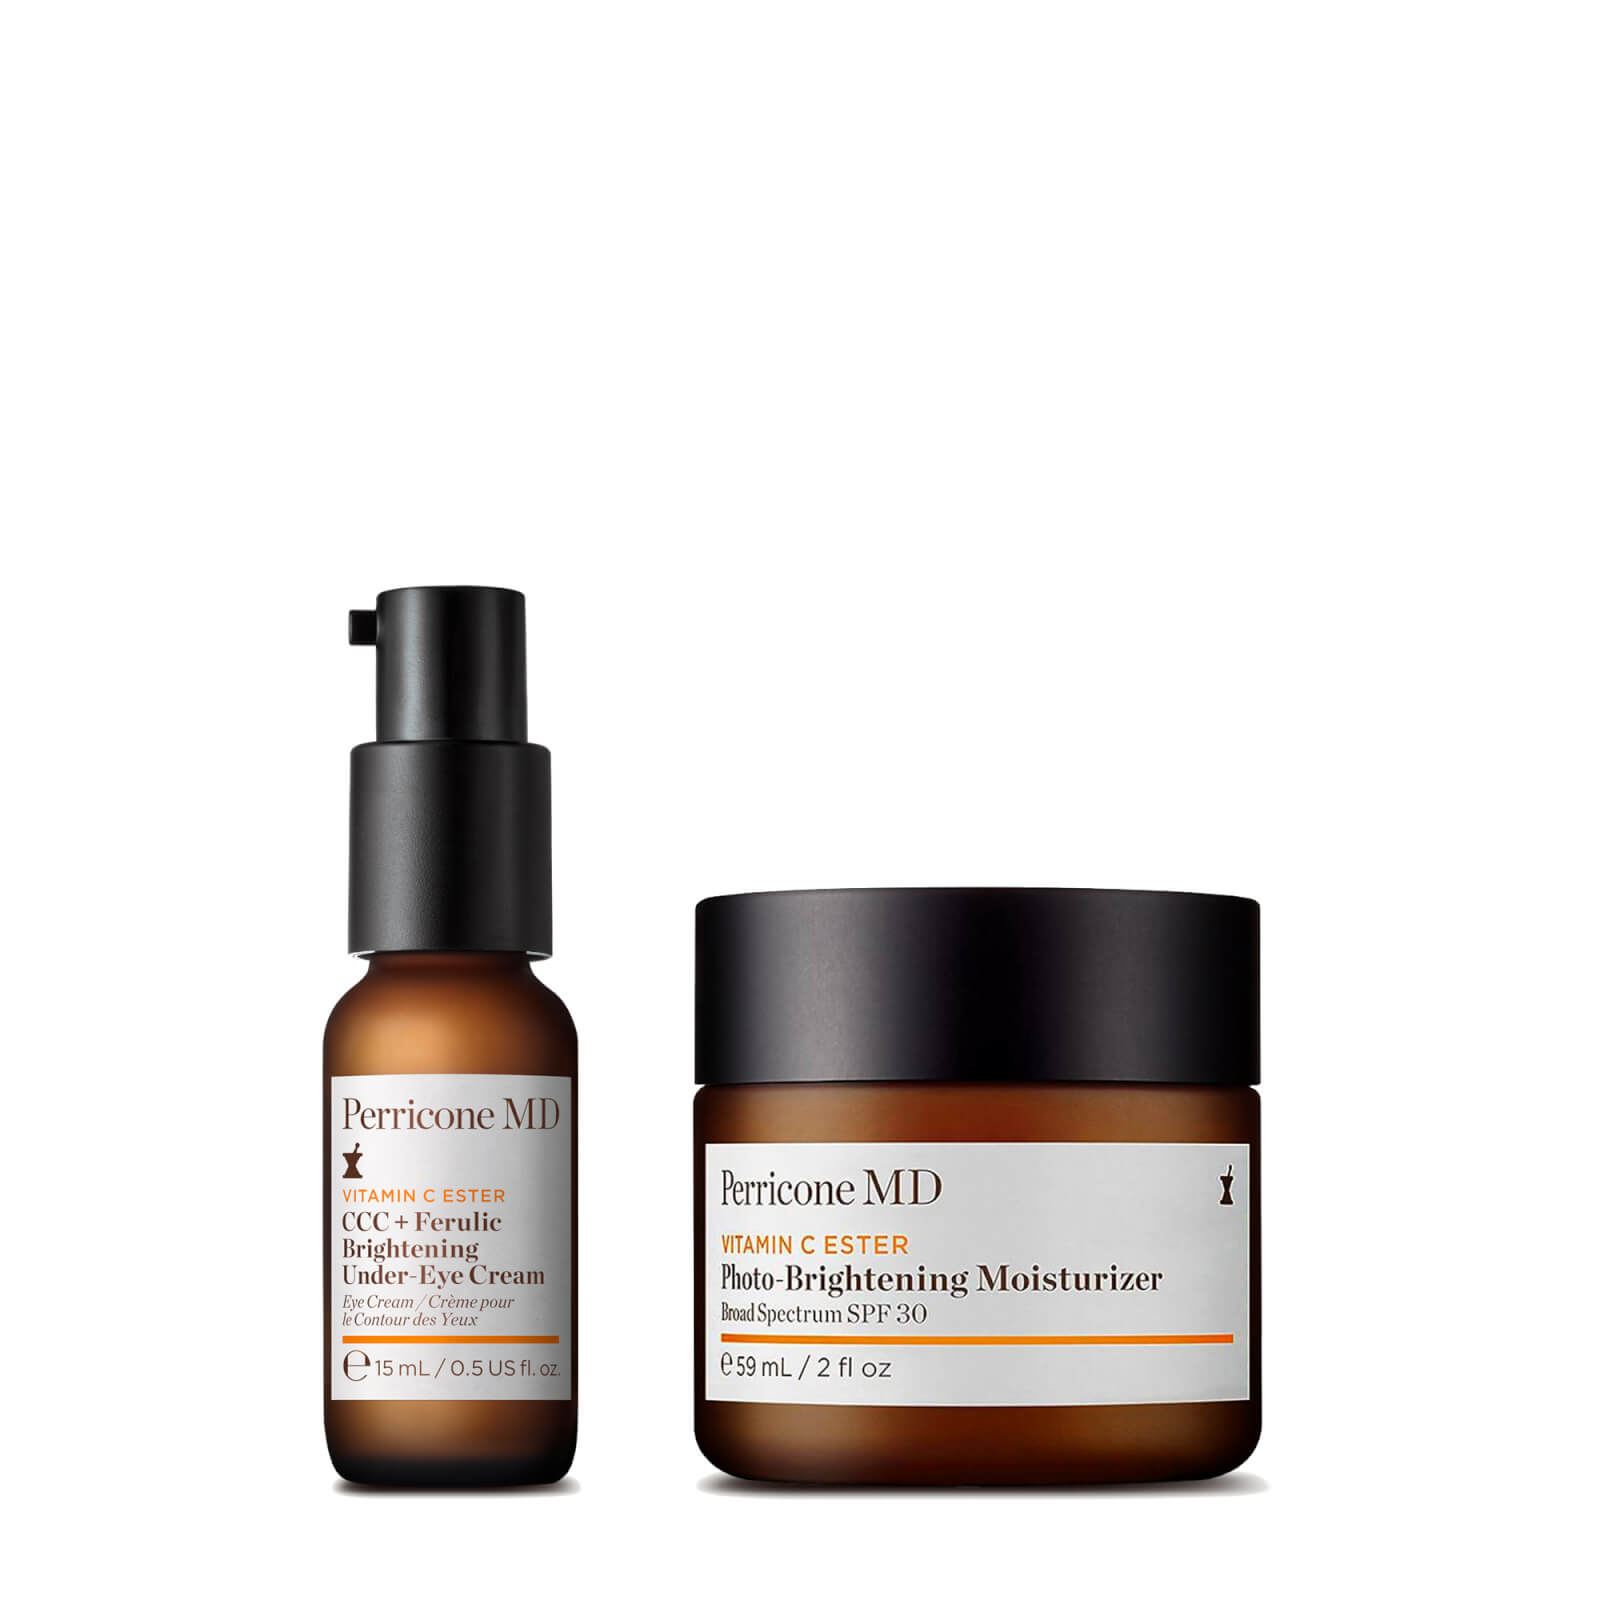 Perricone Md Correct + Protect Brightening Duo